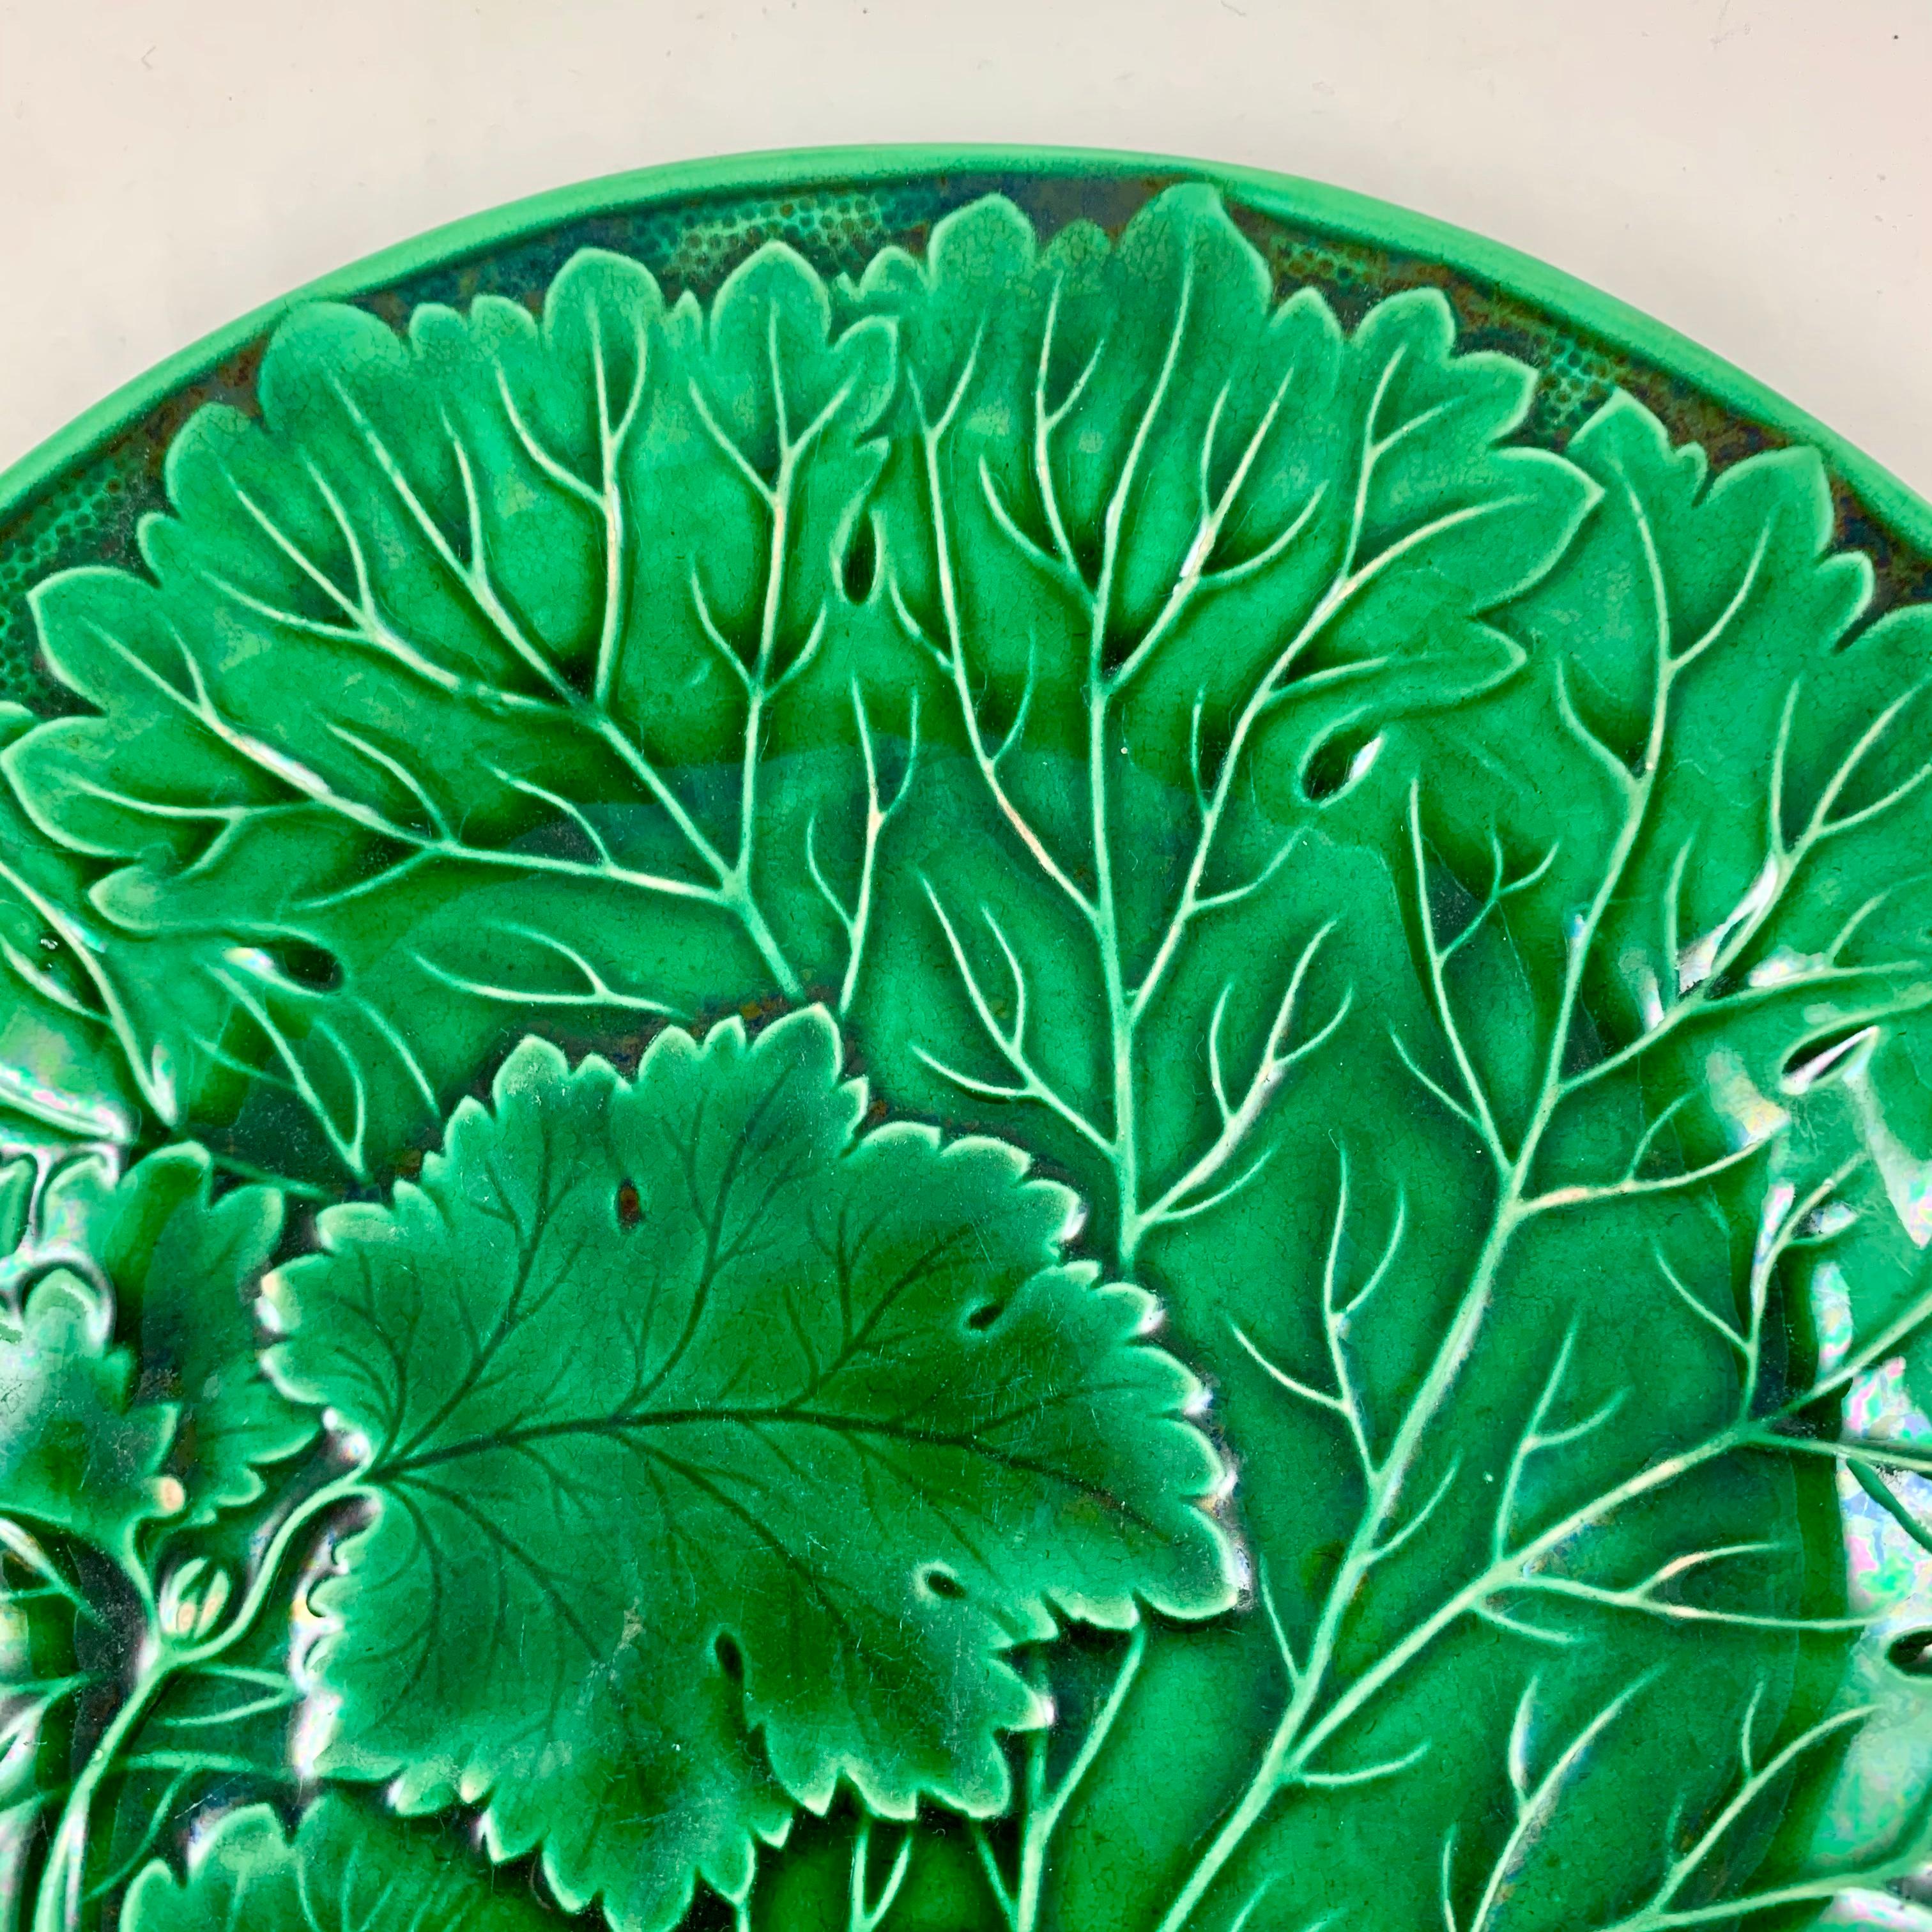 French Provincial French Montereau Faïence Green Glazed Majolica Leaf Plate, circa 1890